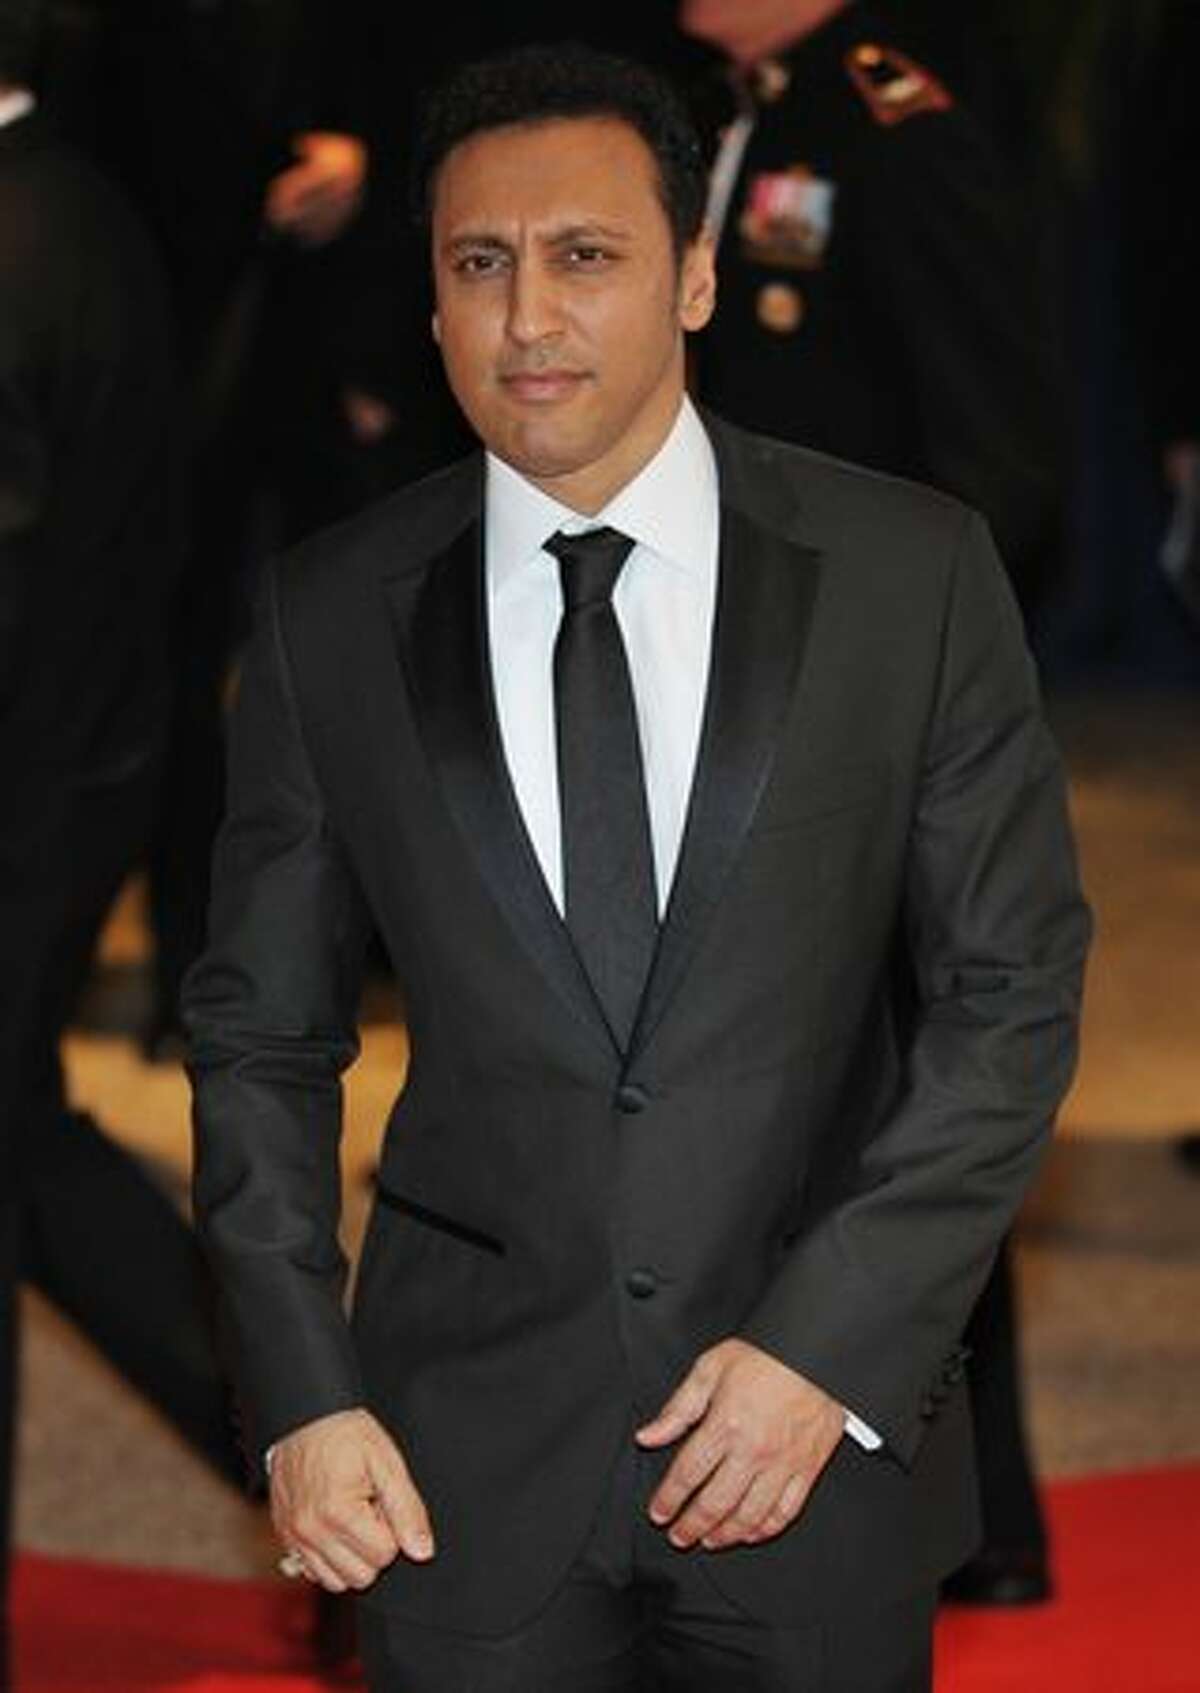 Daily Show correspondent Aasif Mandvi arrives for the 2010 White House Correspondents Dinner May 1, 2010 at a hotel in Washington, D..C.